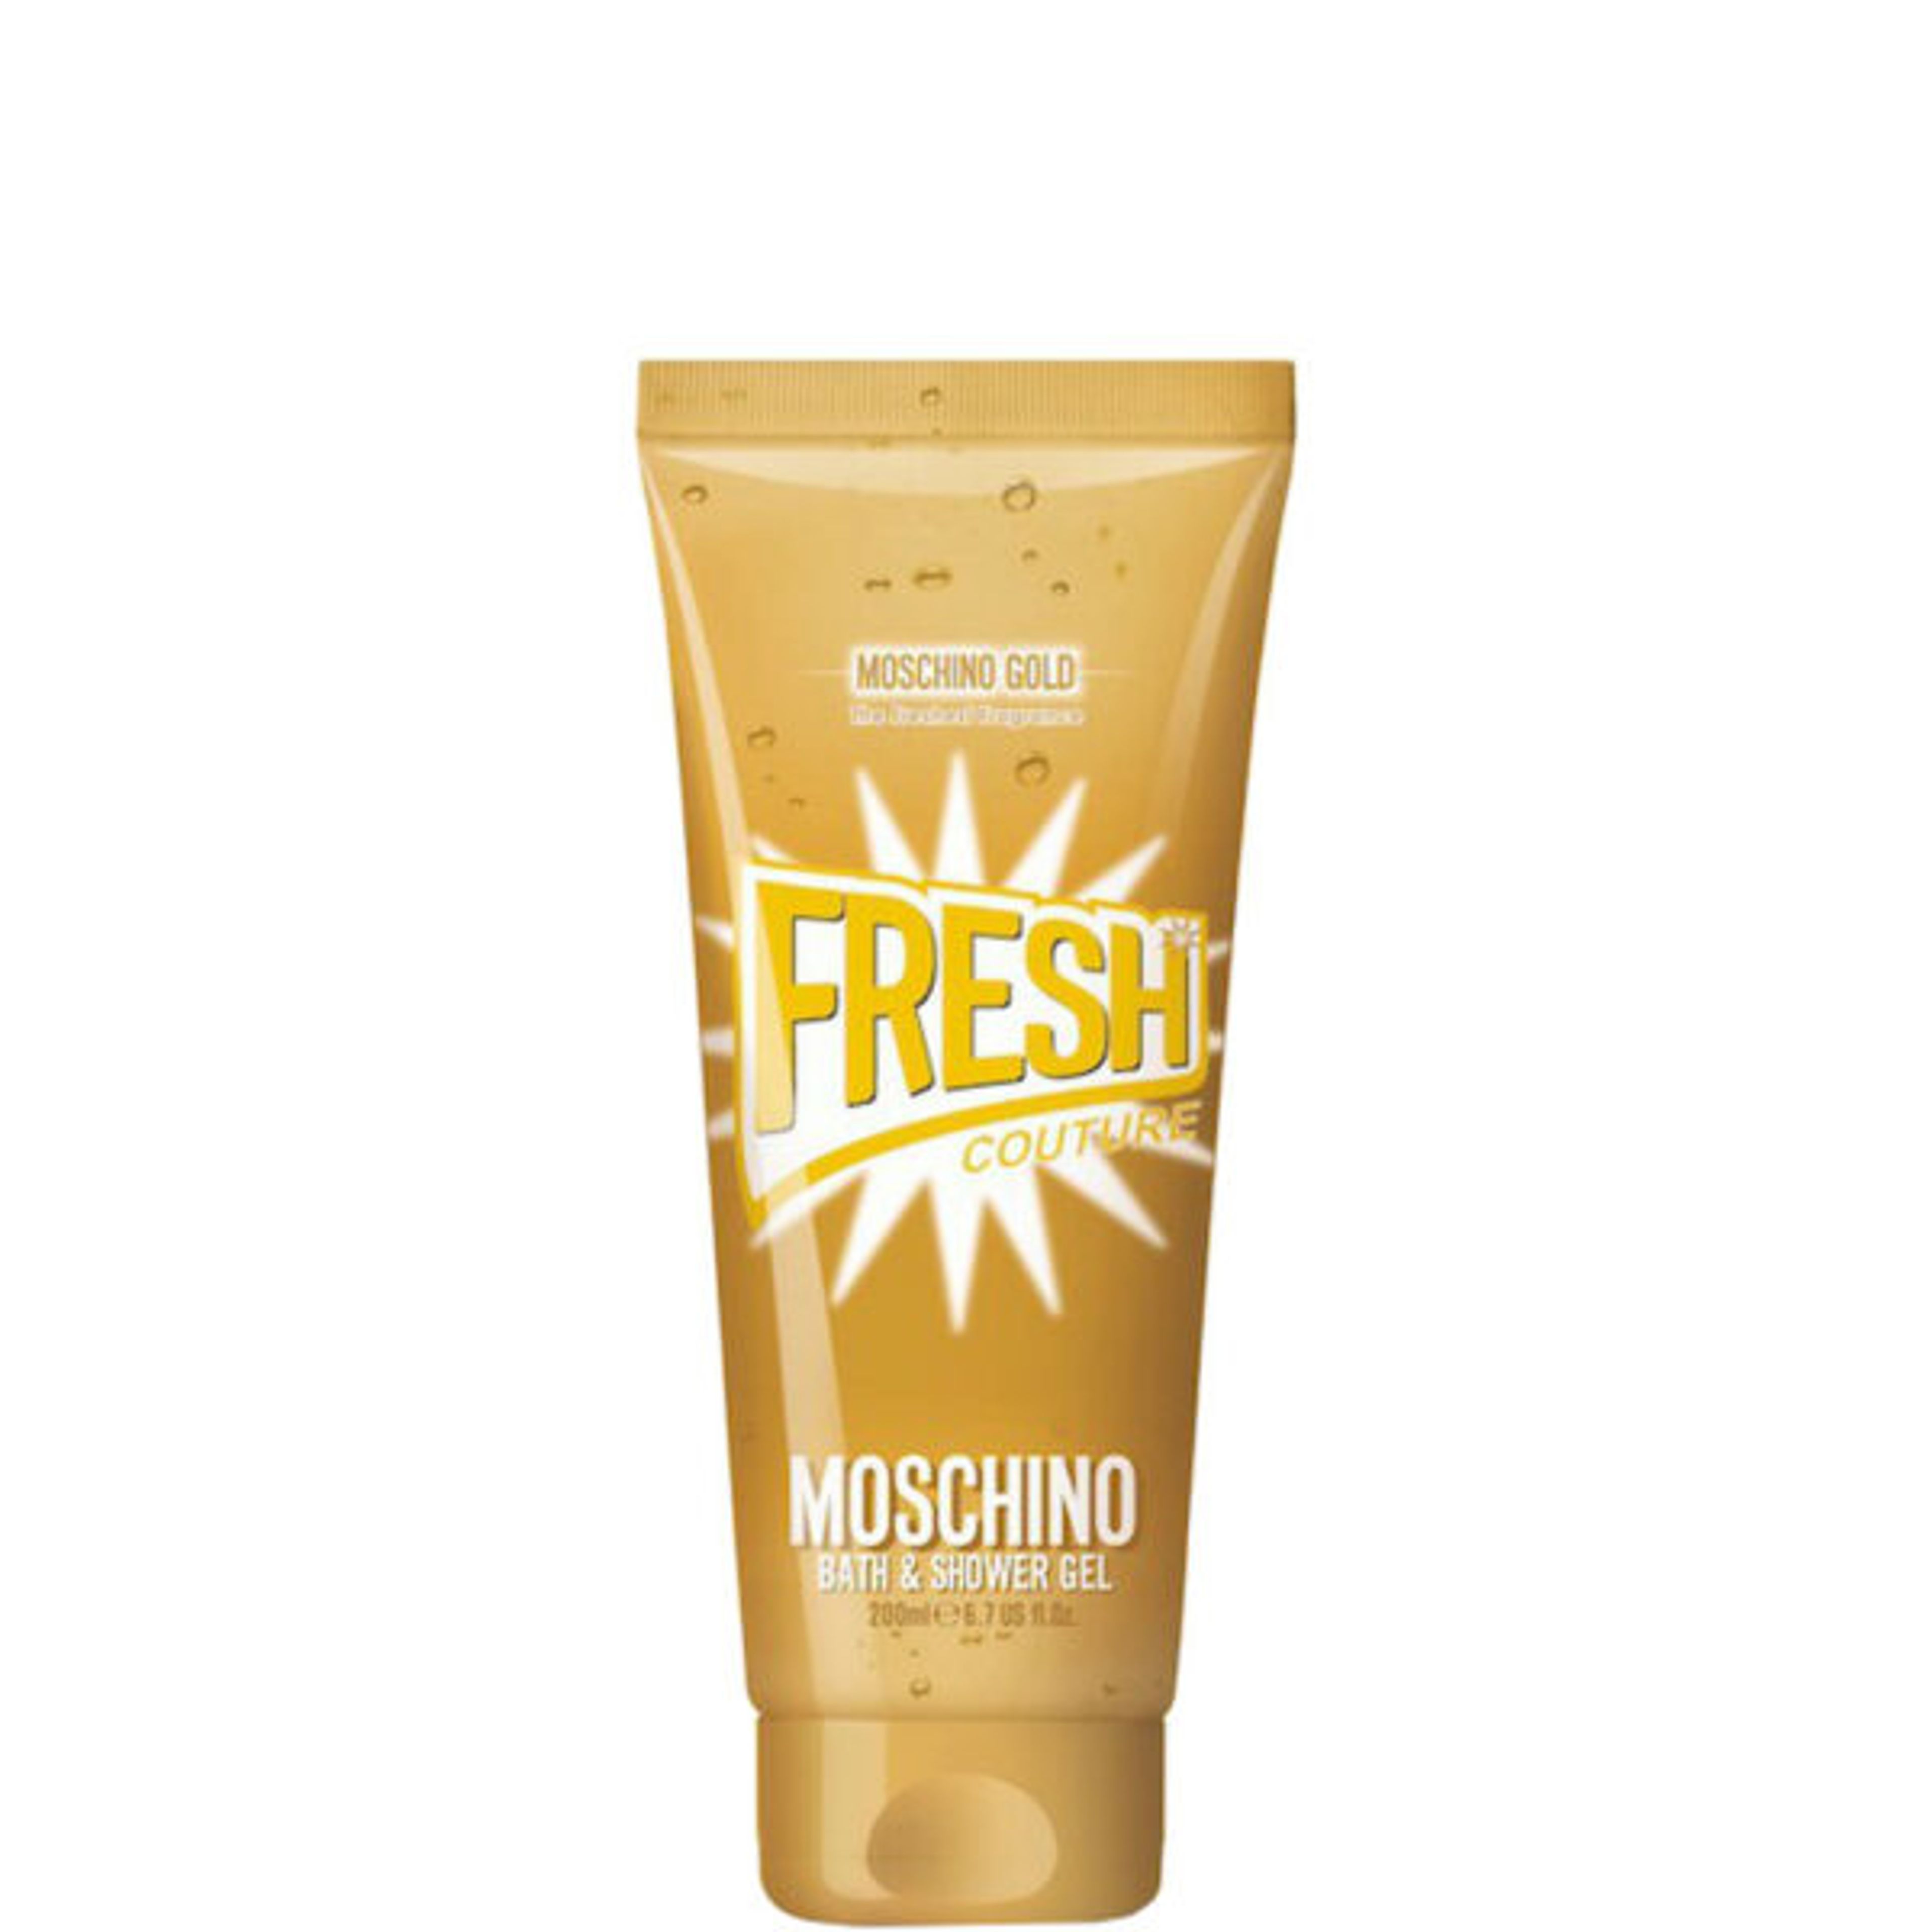 Moschino Moschino Gold Fresh Couture The Freshest Bath And Shower Gel 1